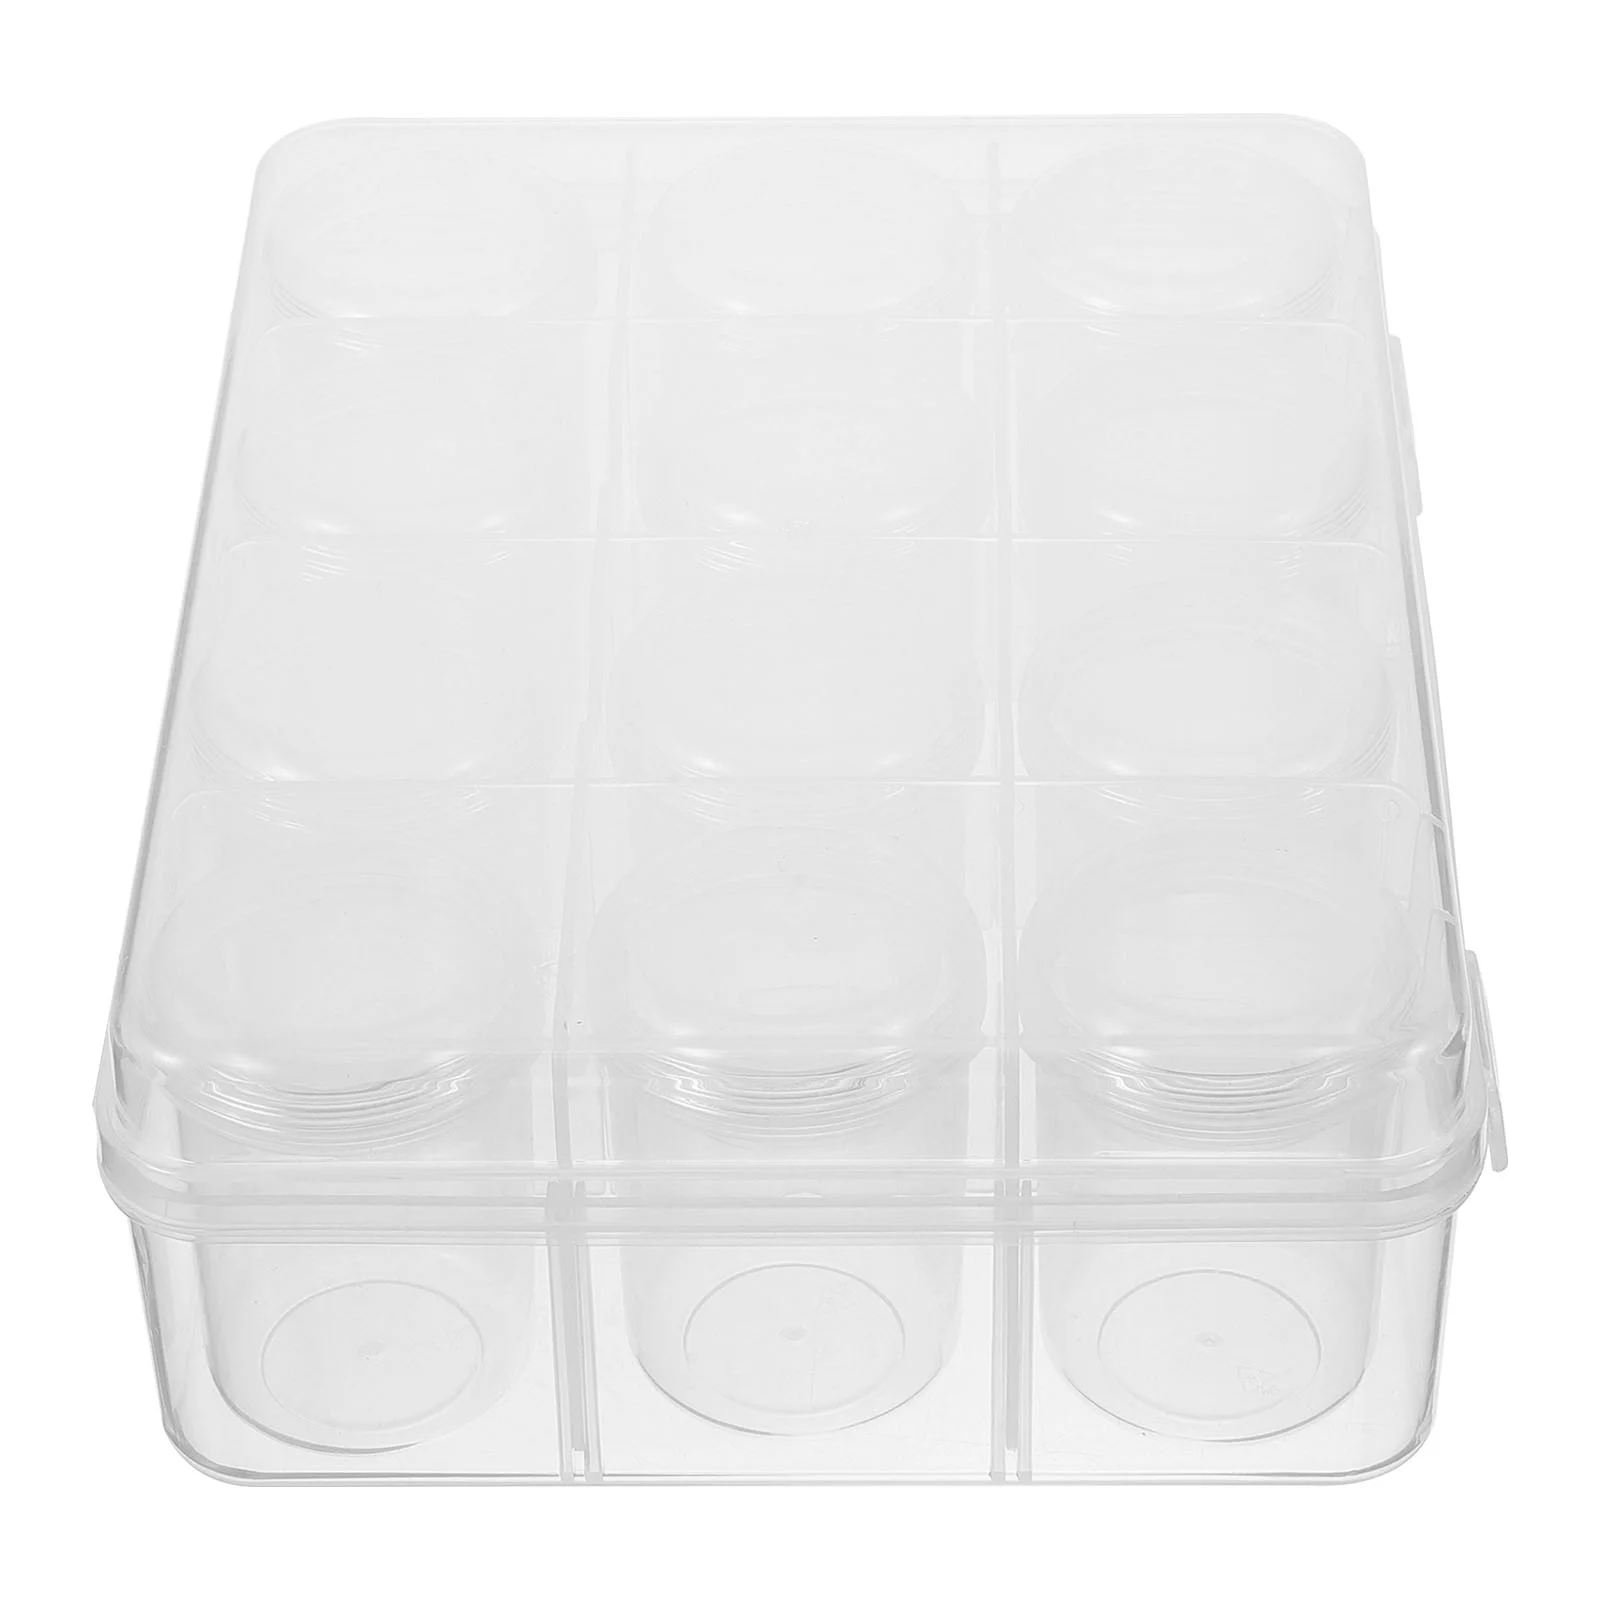 

Compartment Organizer Bead Case Loose Beads Jewels Multi-function Containers Lid Multi-grid Holder Plastic Jewelry Storage